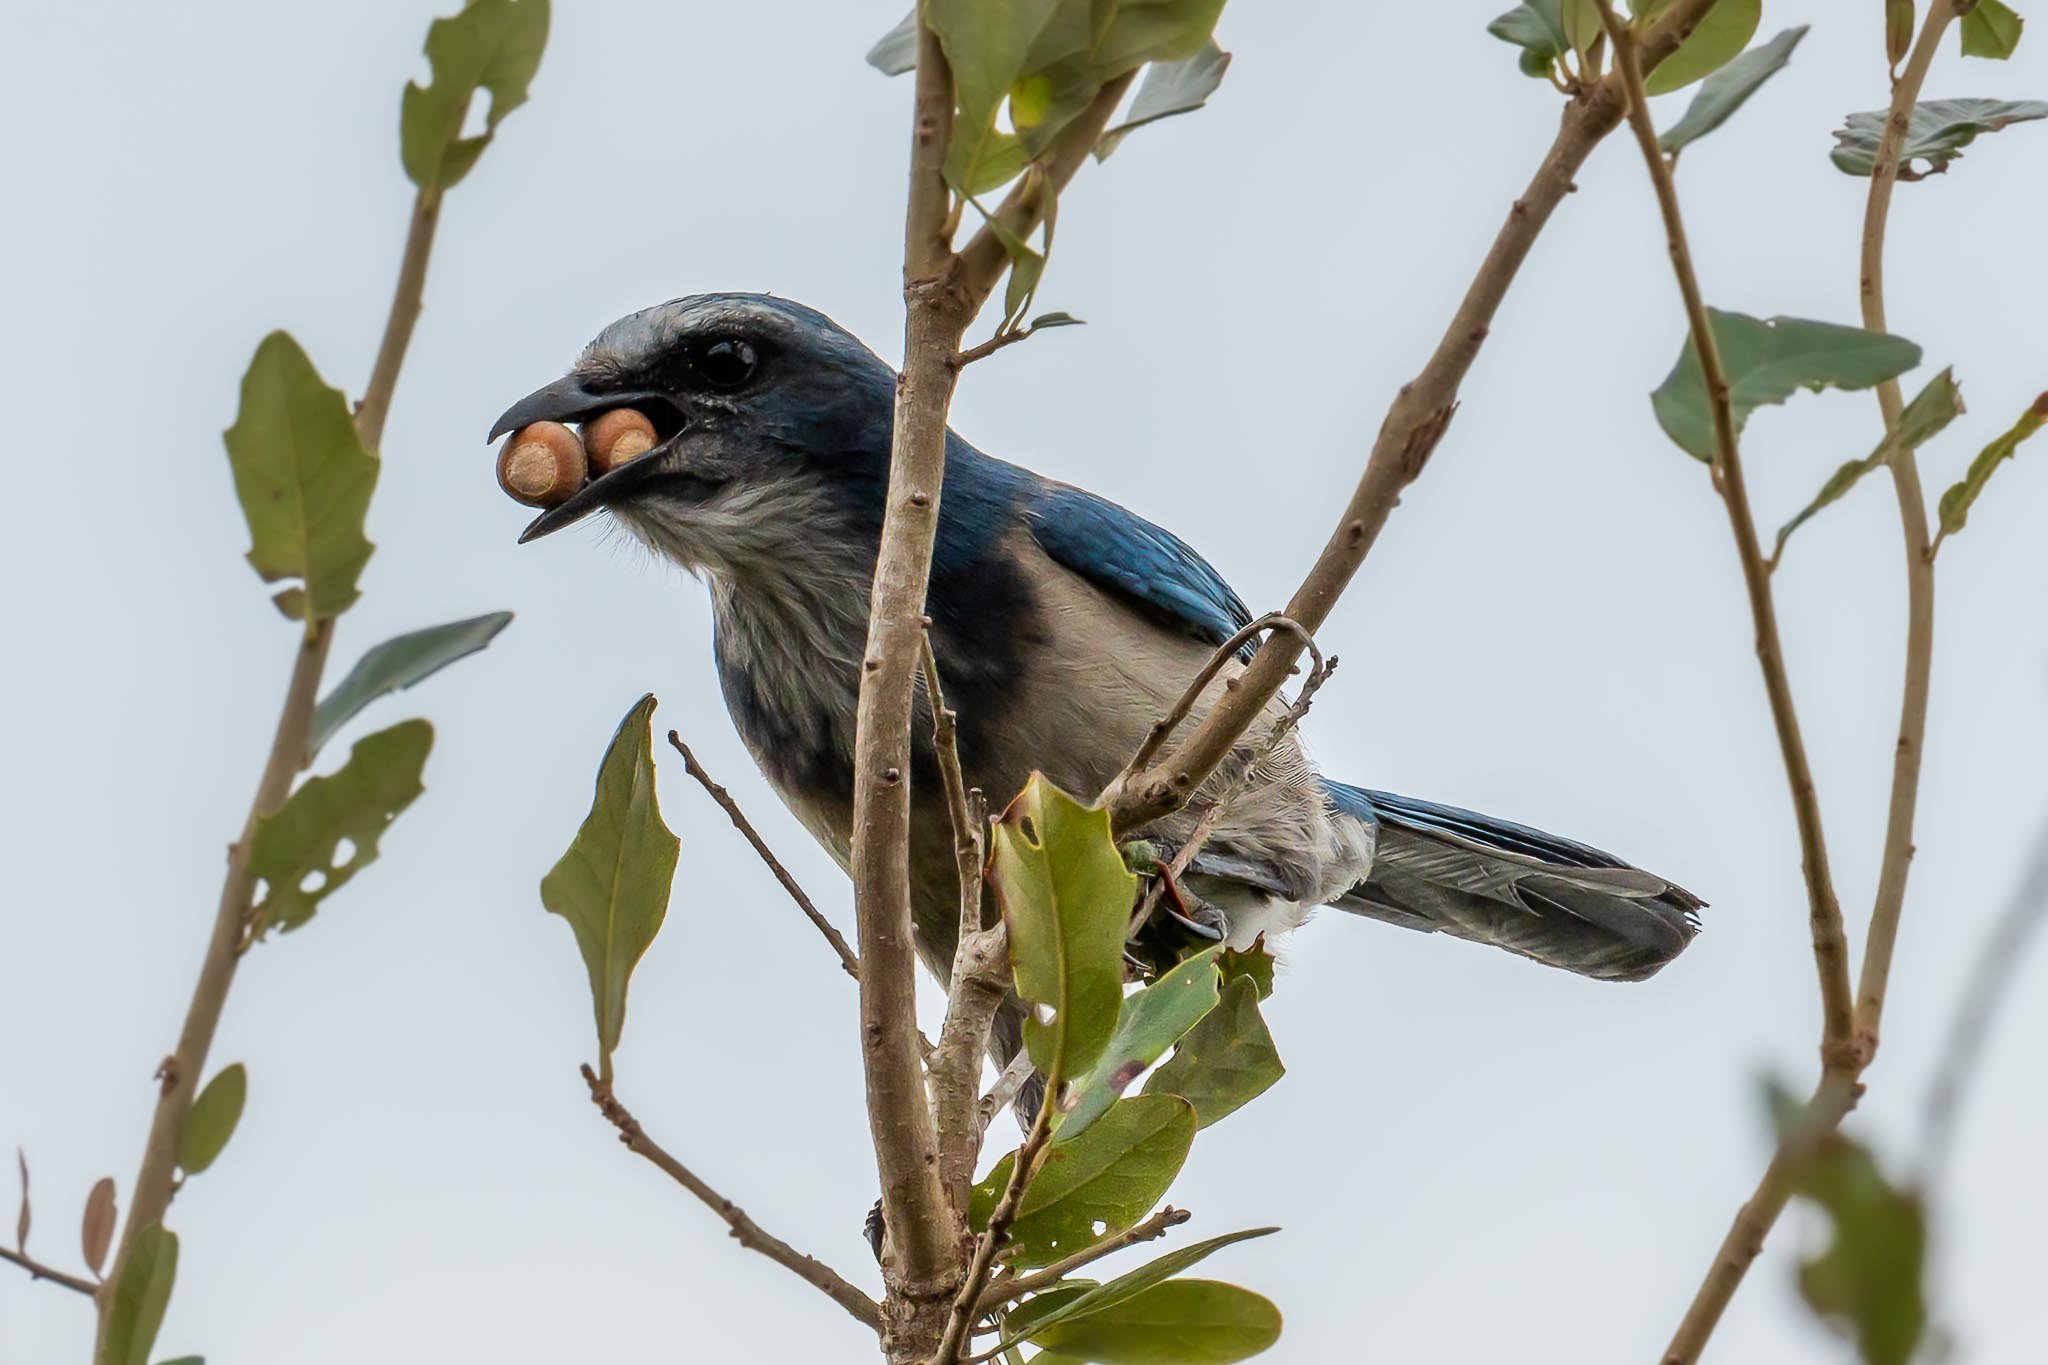 Florida scrub-jay perched in an oak tree with two acorns in its mouth.